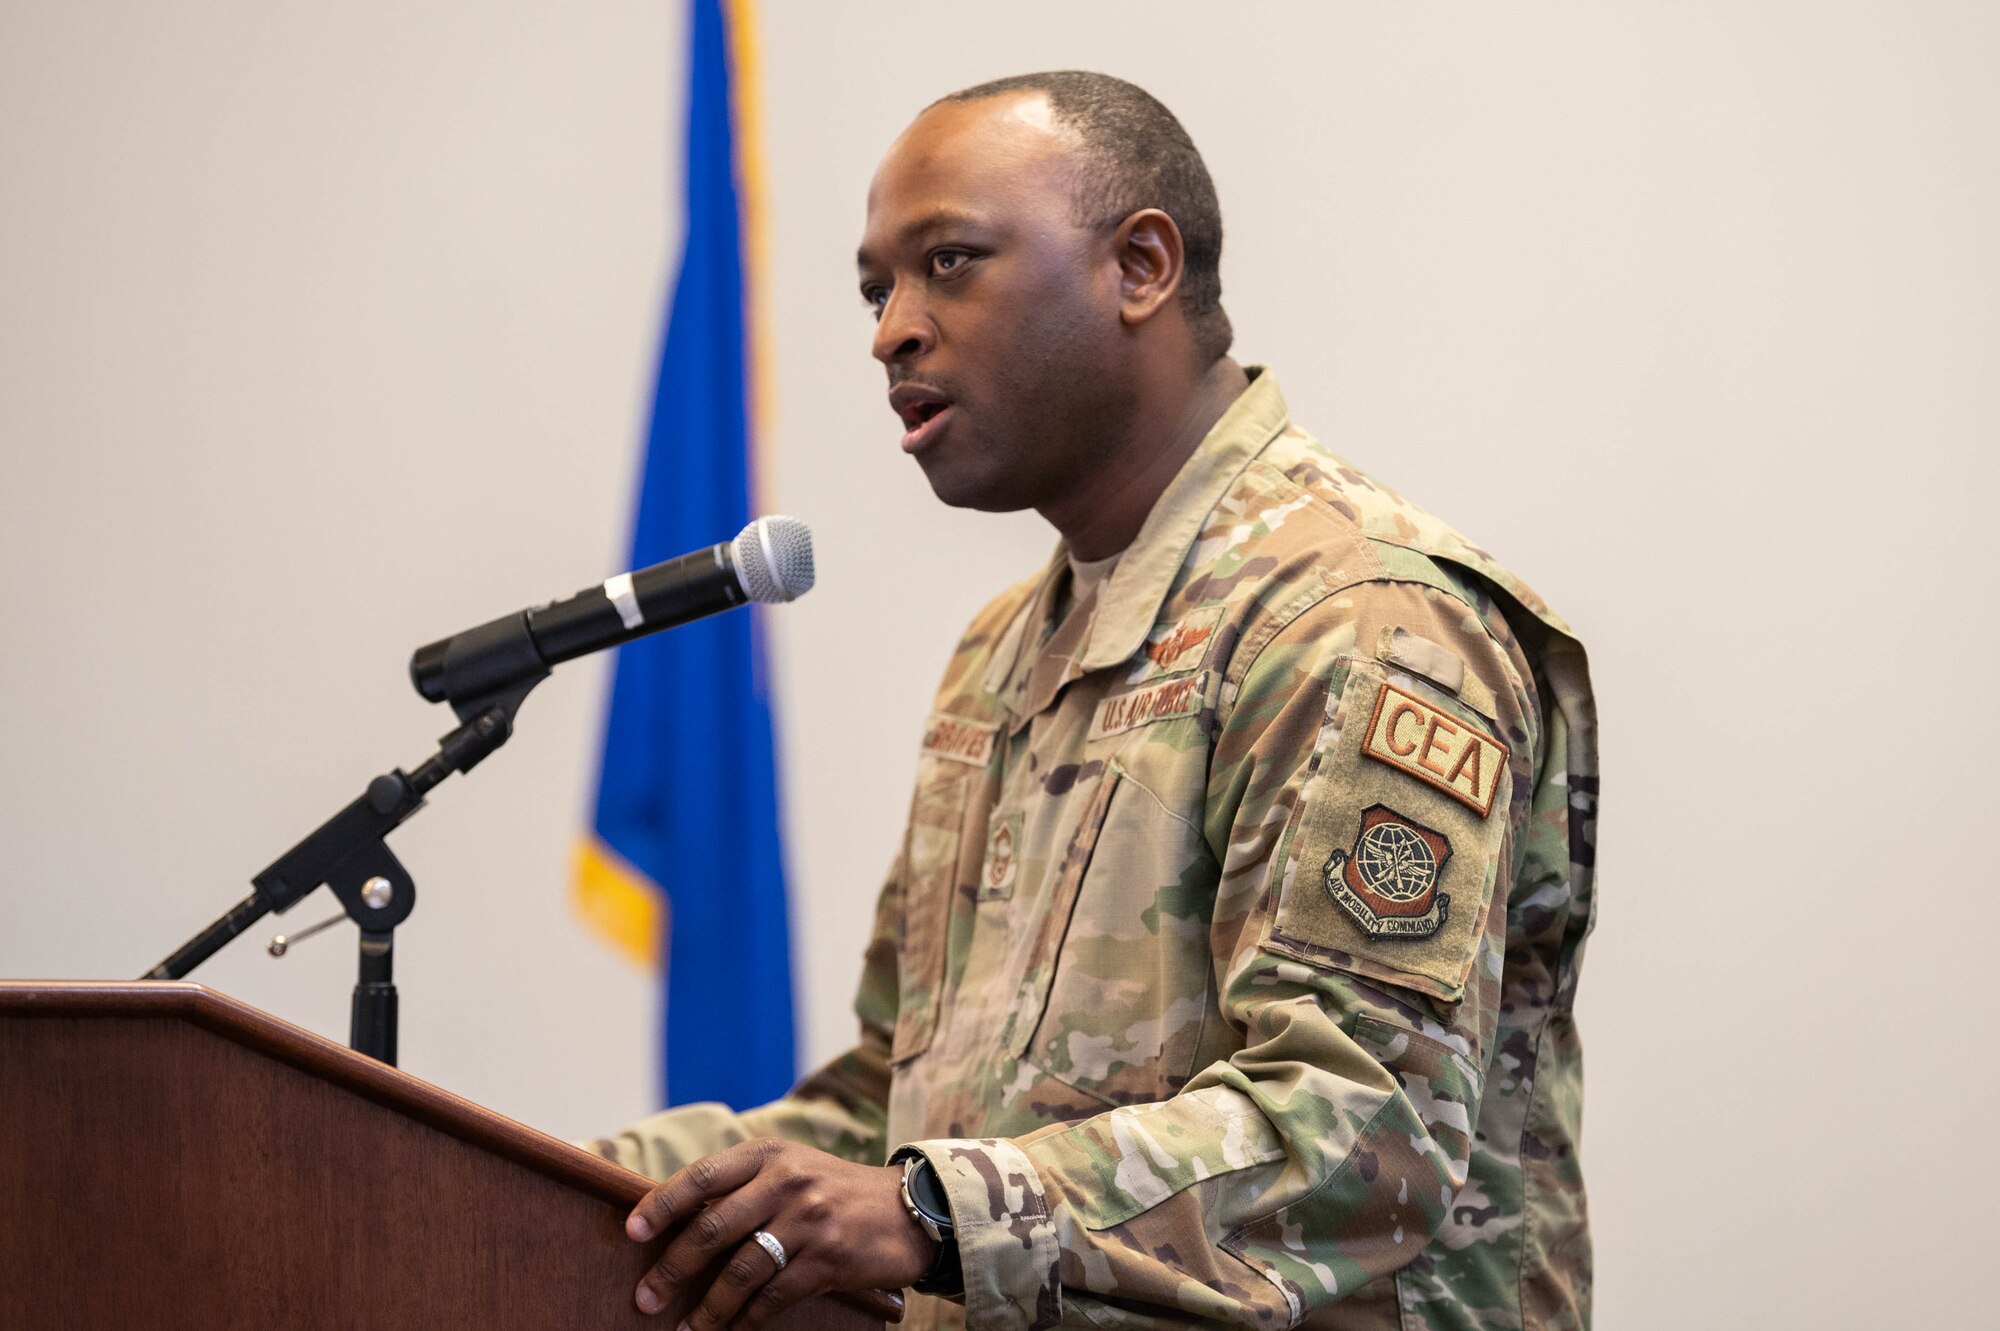 Senior Master Sgt. Waldell Graves, 9th Airlift Squadron senior enlisted leader, speaks at the Martin Luther King Jr. Remembrance Day luncheon at Dover Air Force Base, Delaware, Jan. 19, 2022. Graves highlighted King’s upbringing and accomplishments that eventually positioned him to lead the civil rights movement. (U.S. Air Force photo by Mauricio Campino)